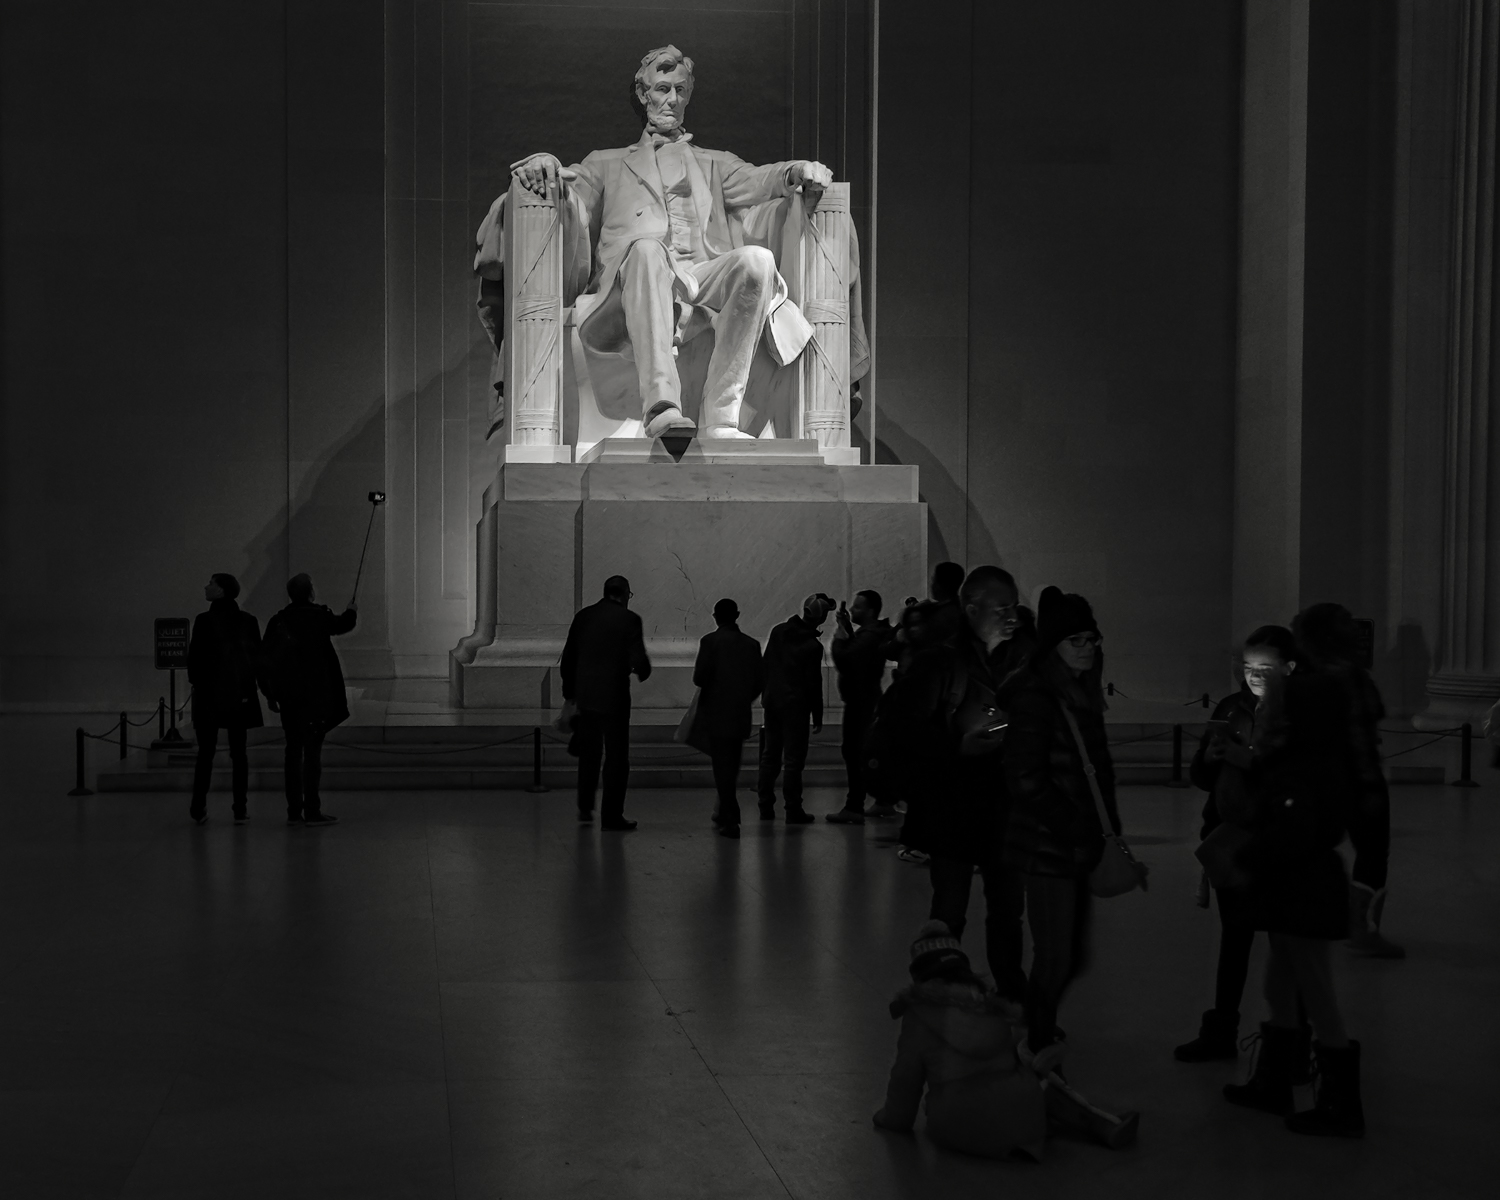 Mr. Lincoln No 2. • The Lincoln Memorial, National Mall, Washington, DC. Fuji x-T2 and a Fujinon XF10-24mm f4 OIS. Image exposed at ISO 1200 at f4 for 3 seconds.